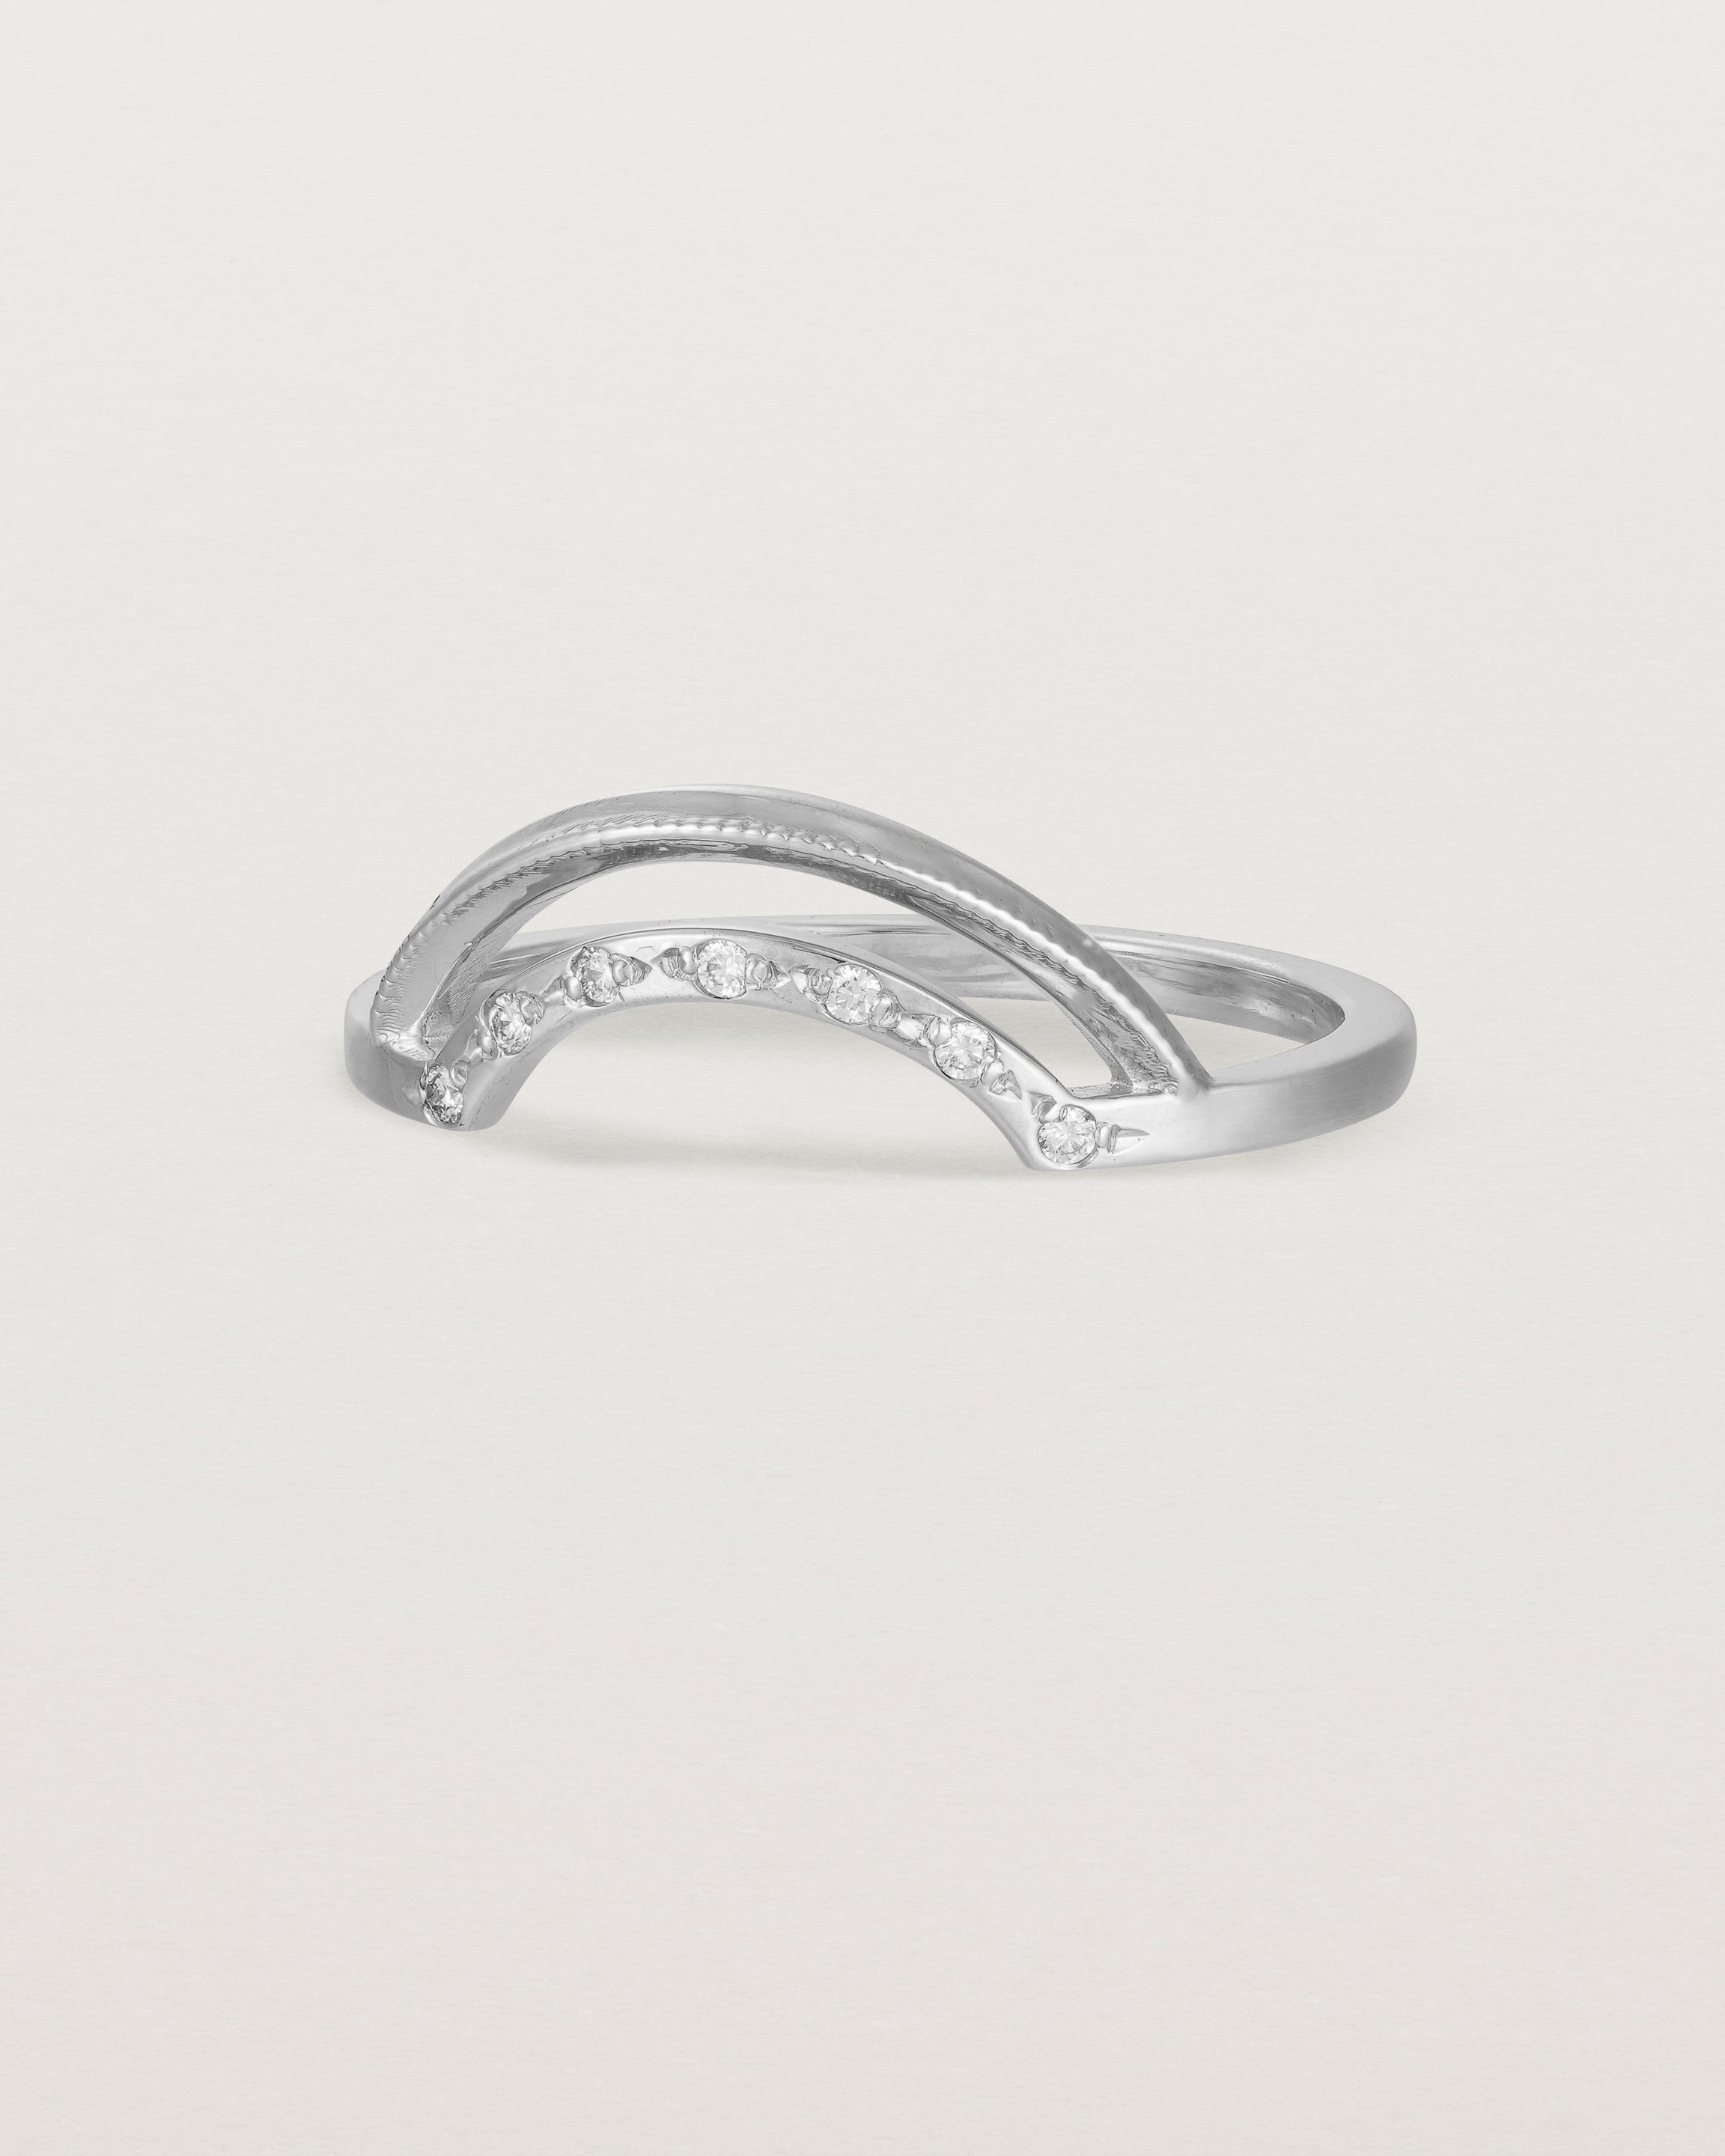 Fit three of a double arc crown ring with white diamonds adoring the inner arc - crafted in white gold.